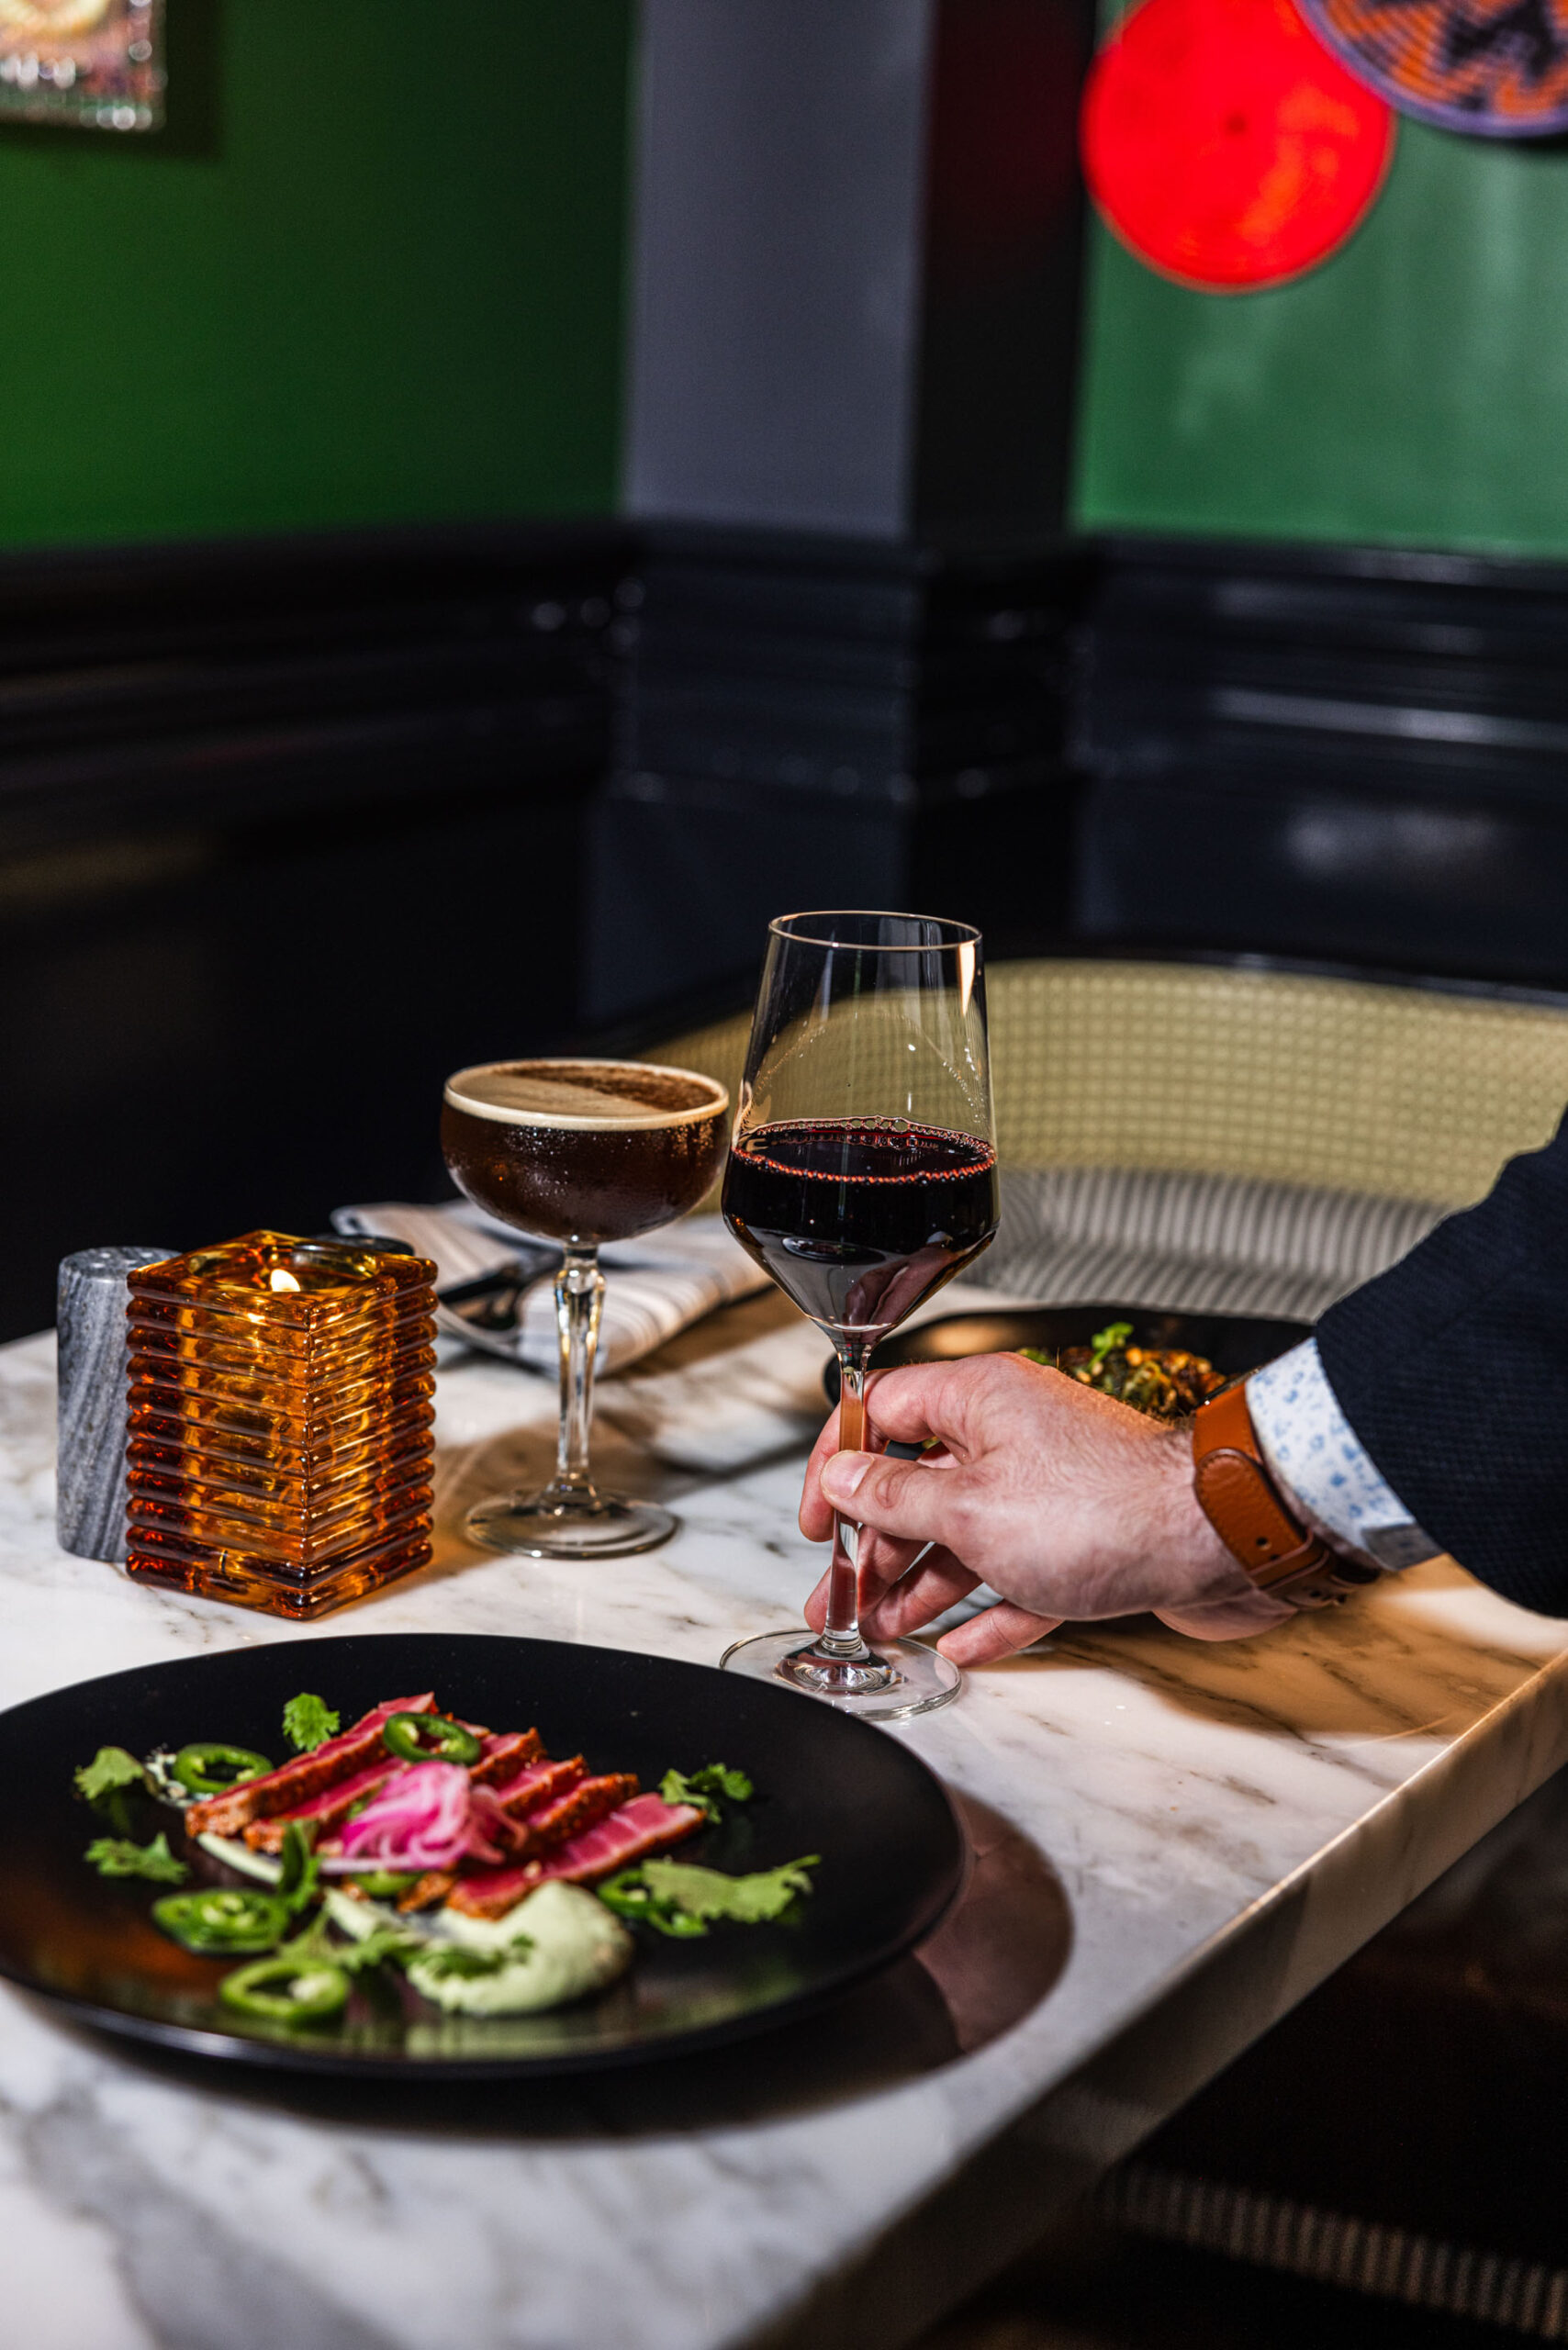 On Valentine's Day, a man elegantly holds a glass of wine and a plate of delectable food.